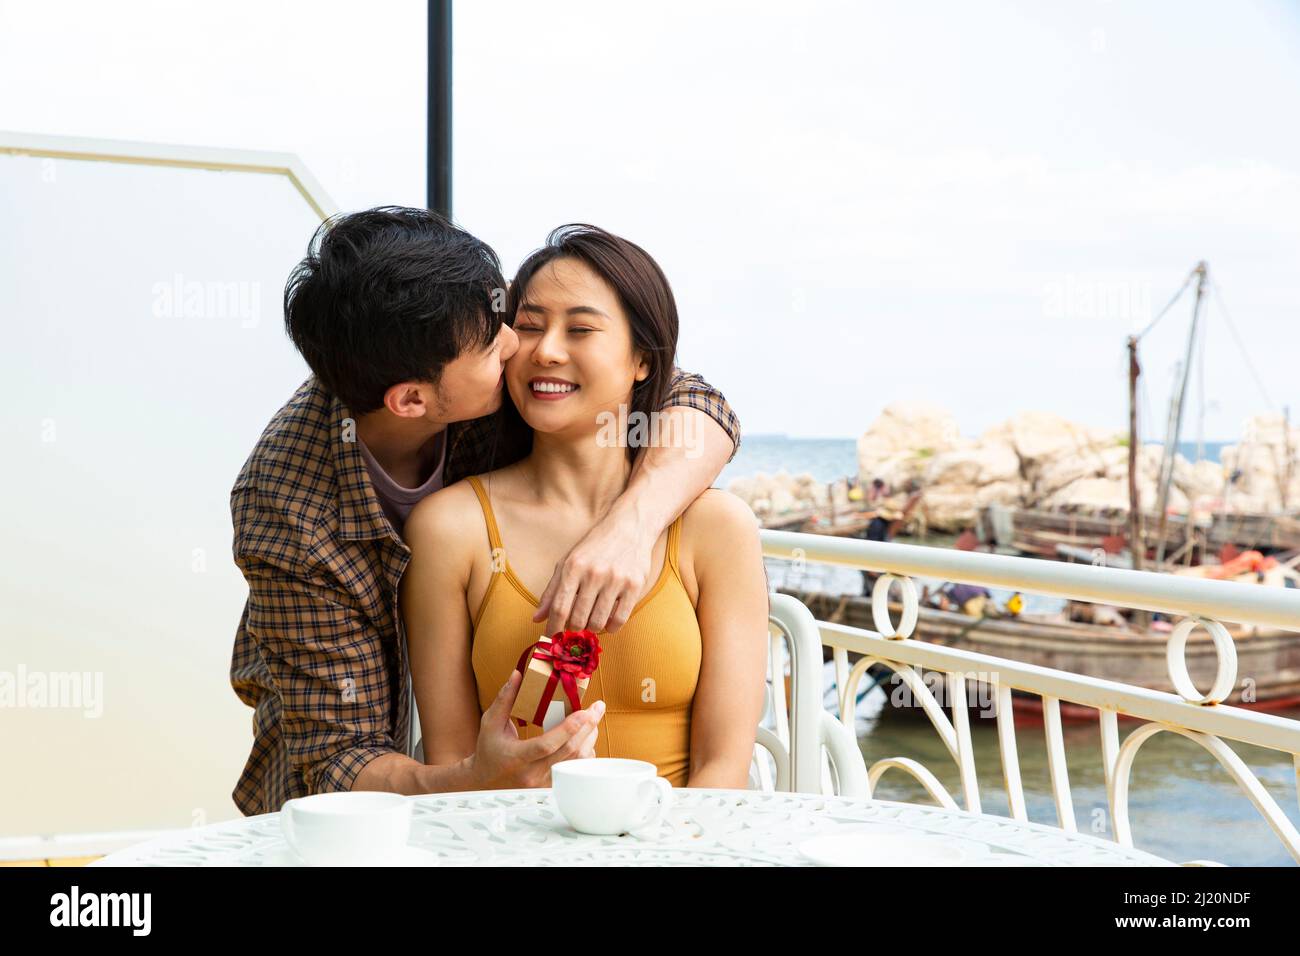 Smiling and kissing young couple giving gifts at the Ocean View restaurant - stock photo Stock Photo